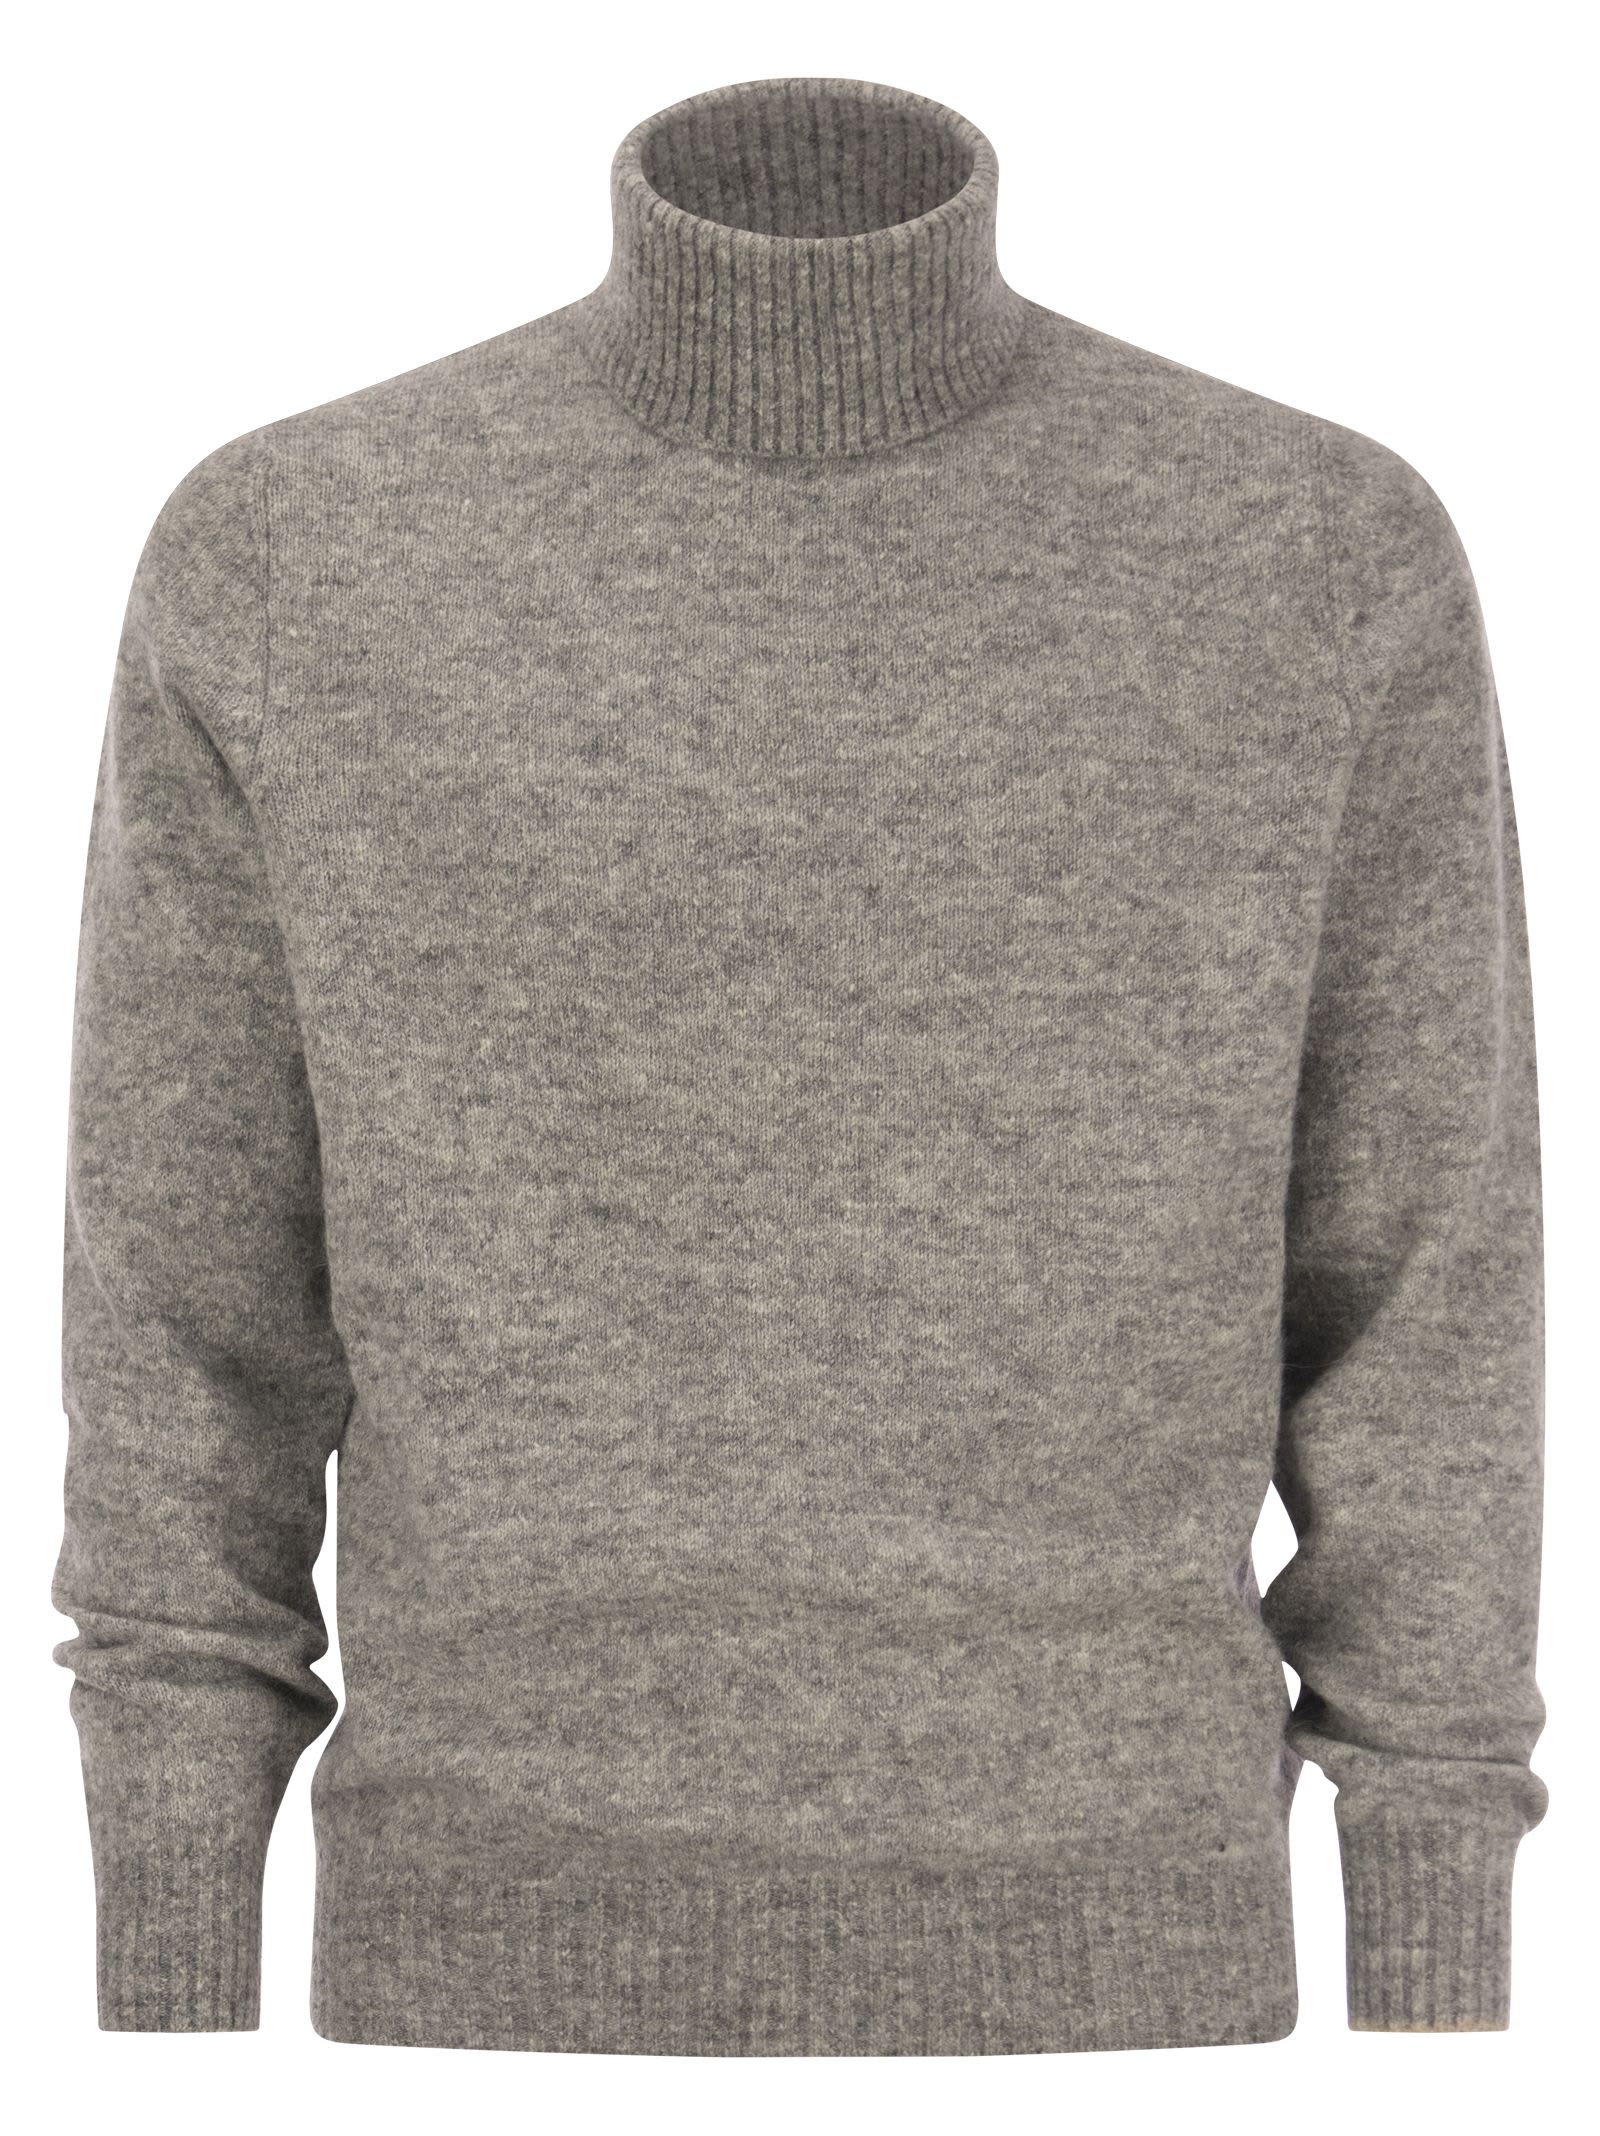 Turtleneck Sweater In Alpaca, Cotton And Wool